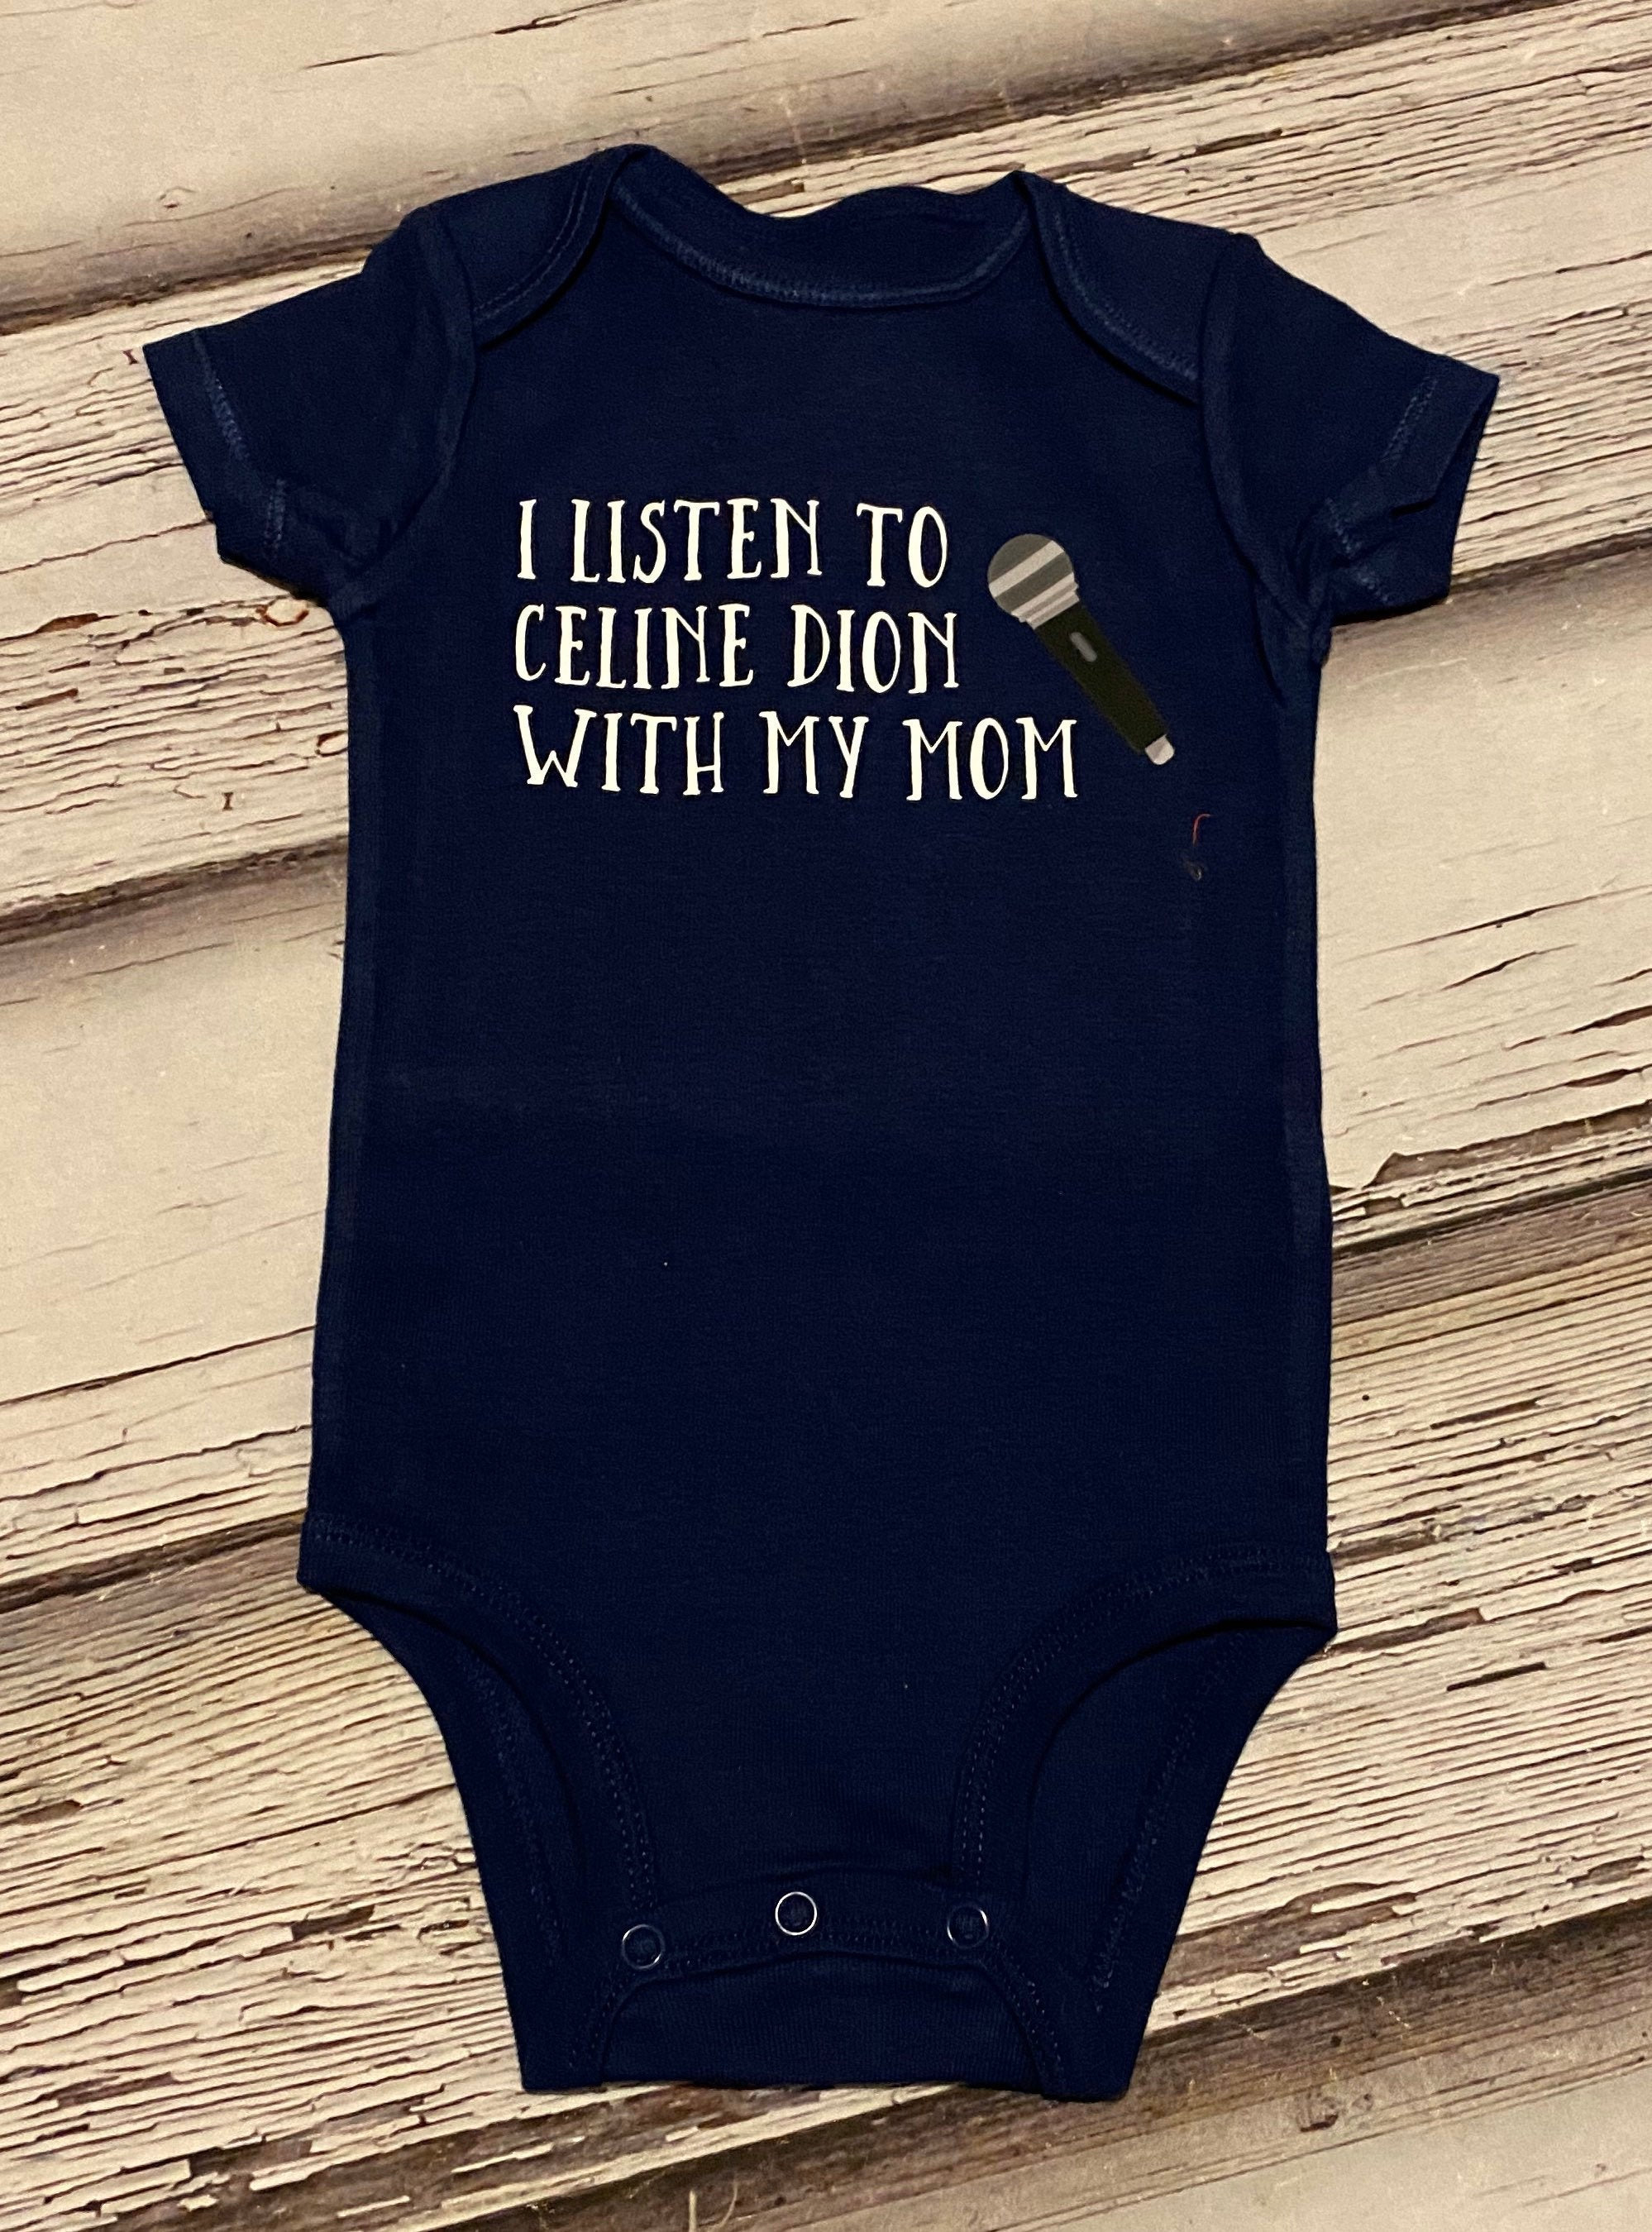 Celine dion baby baby baby